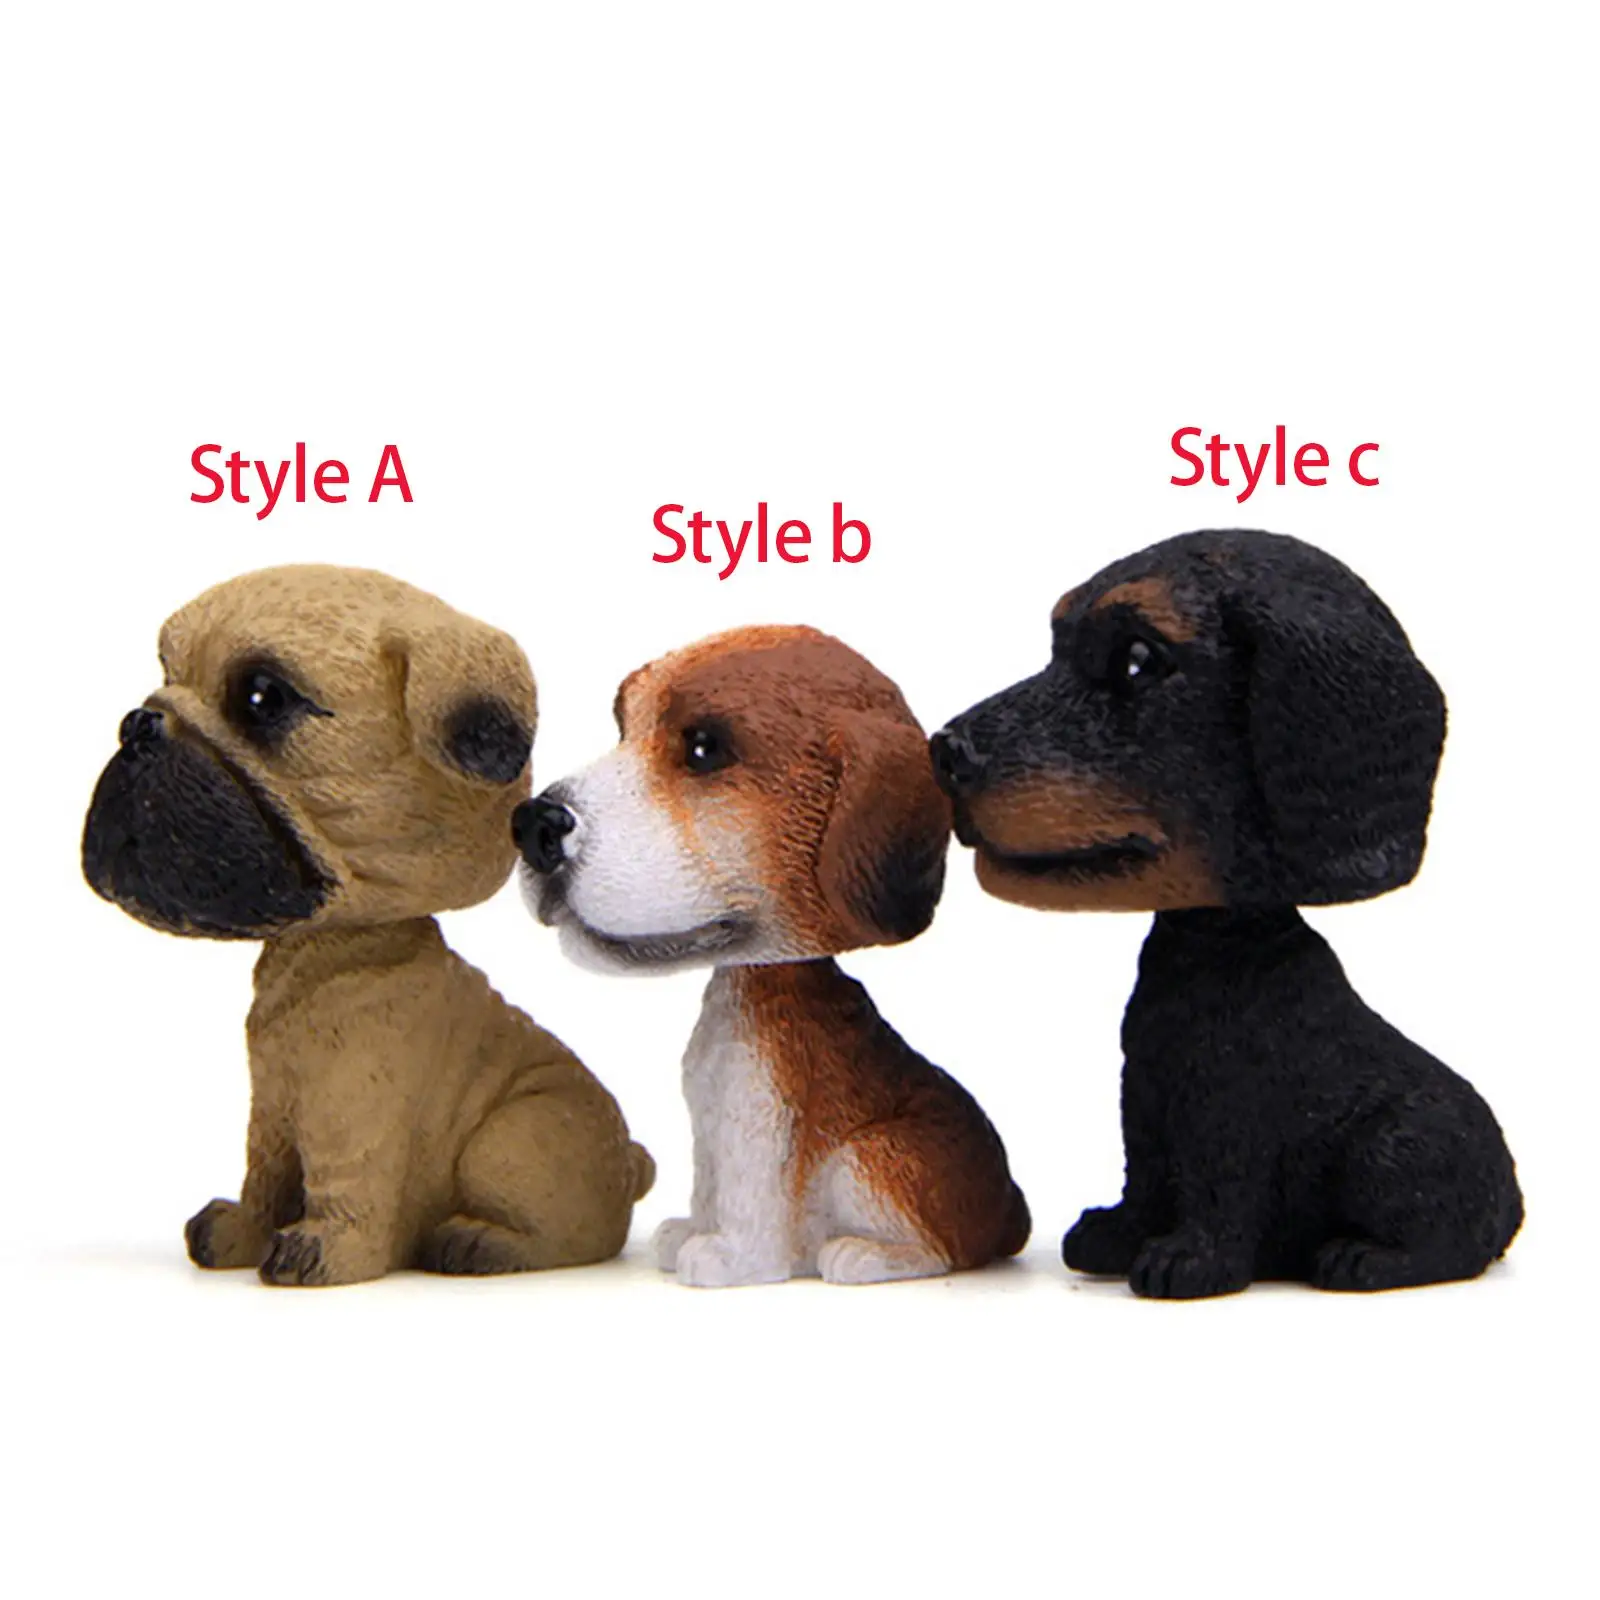 Swaying Dogs Car Ornaments Interior Accessories Resin Universal Creative